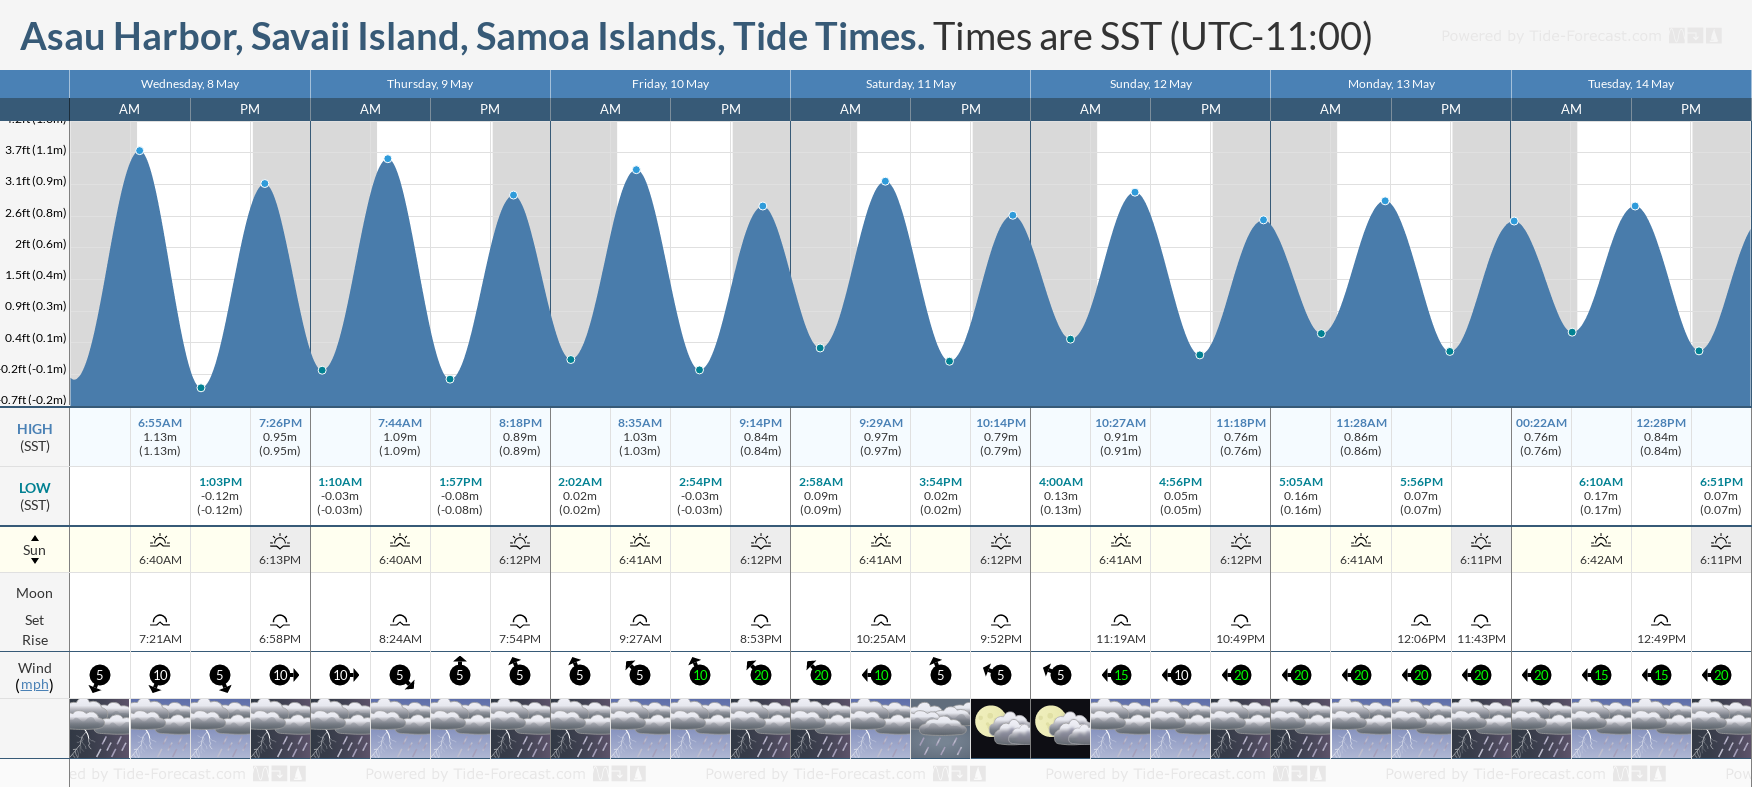 Asau Harbor, Savaii Island, Samoa Islands Tide Chart including high and low tide tide times for the next 7 days